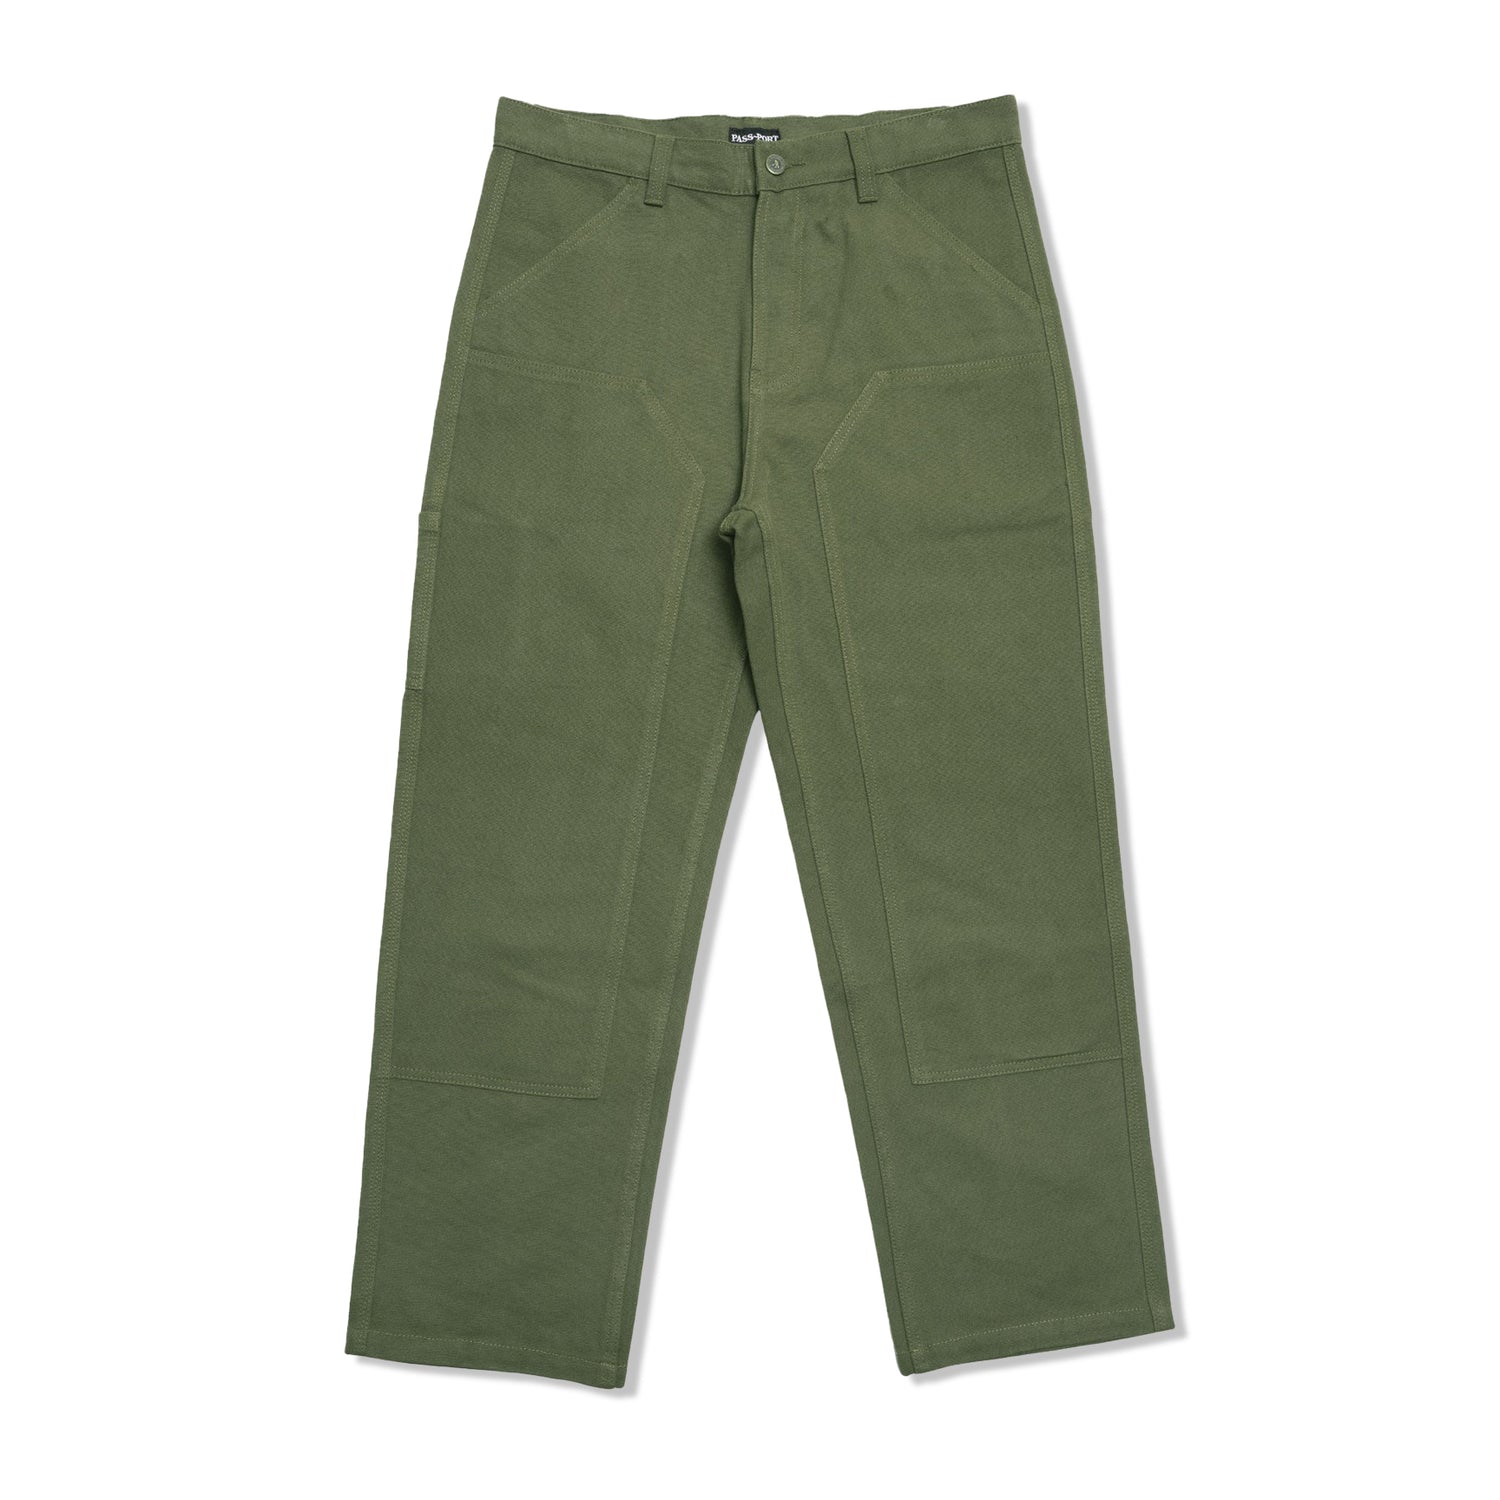 Double Knee Diggers Club Pant, Olive